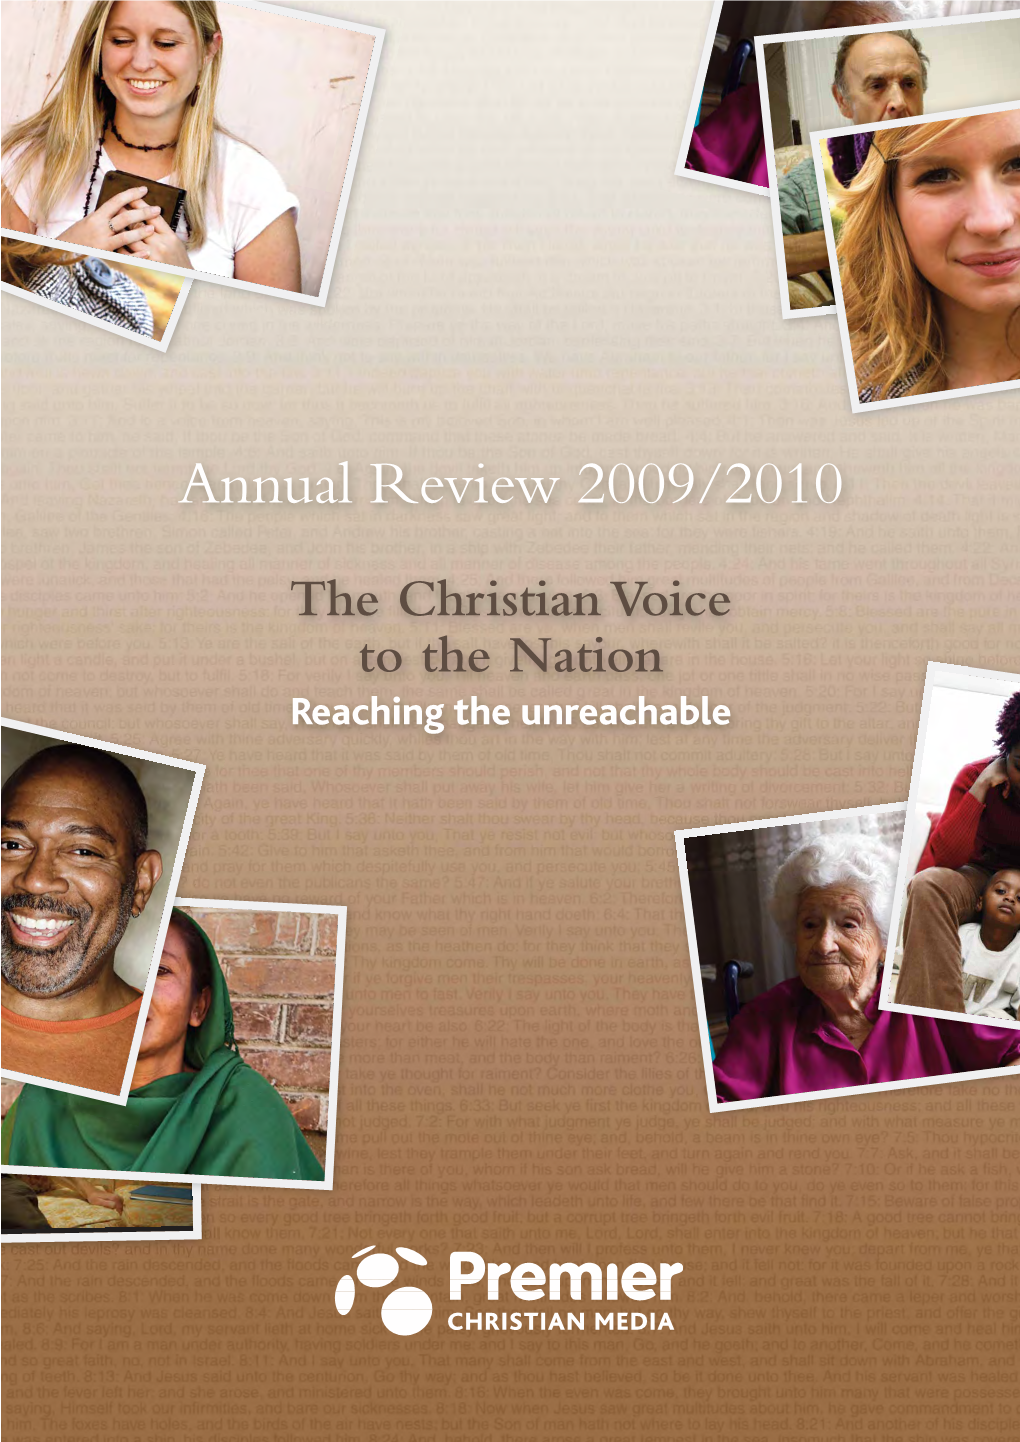 Annual Review 2009/2010